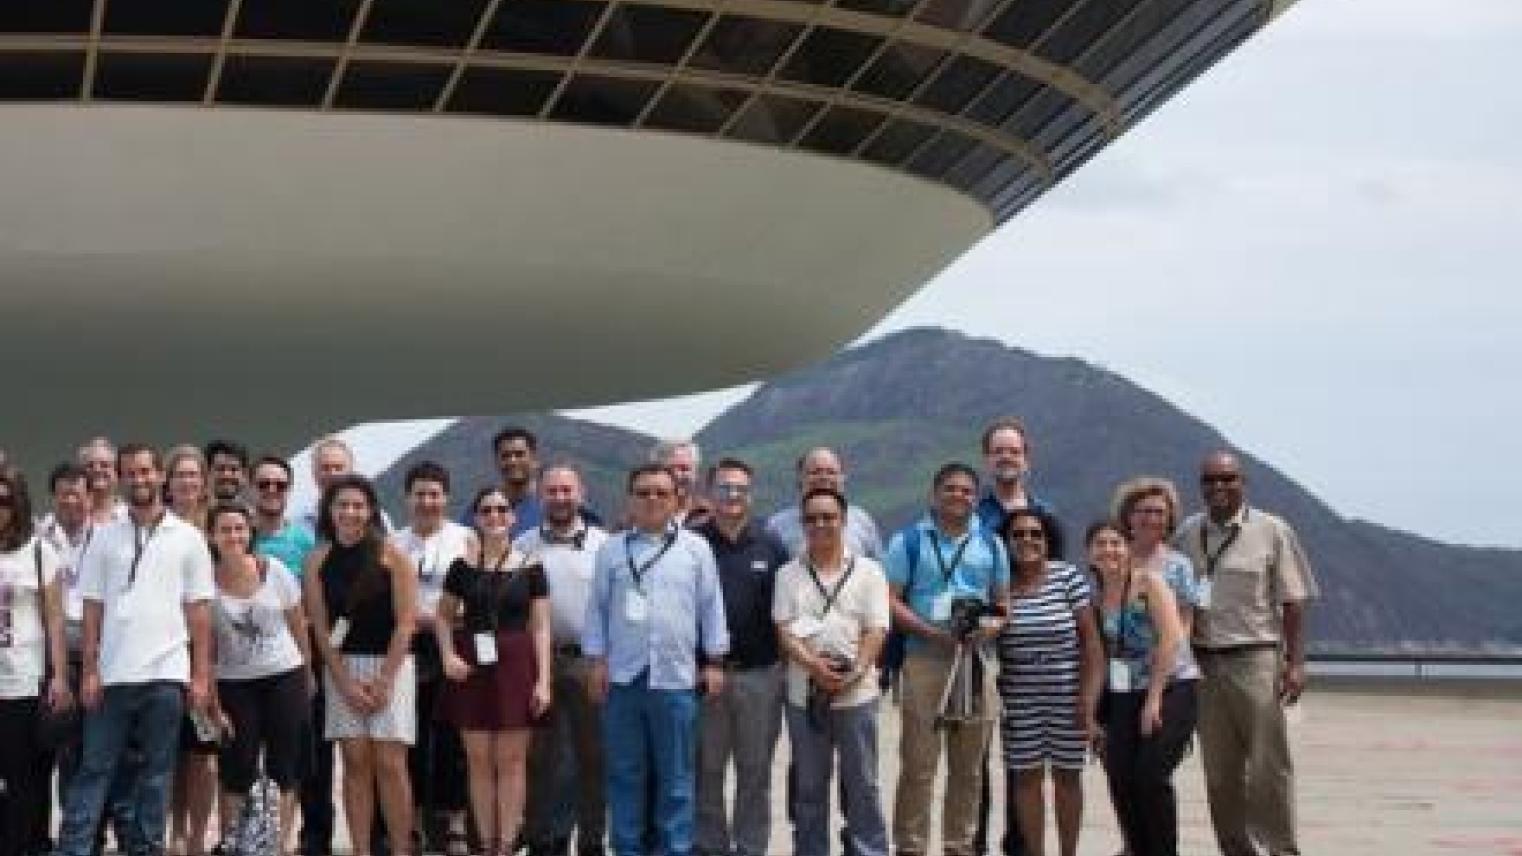 Image: Participants, 13th International Conference on Environmental, Cultural, Economic & Social Sustainability Conference, Greater Rio de Janeiro, Brazil (http://onsustainability.com/)